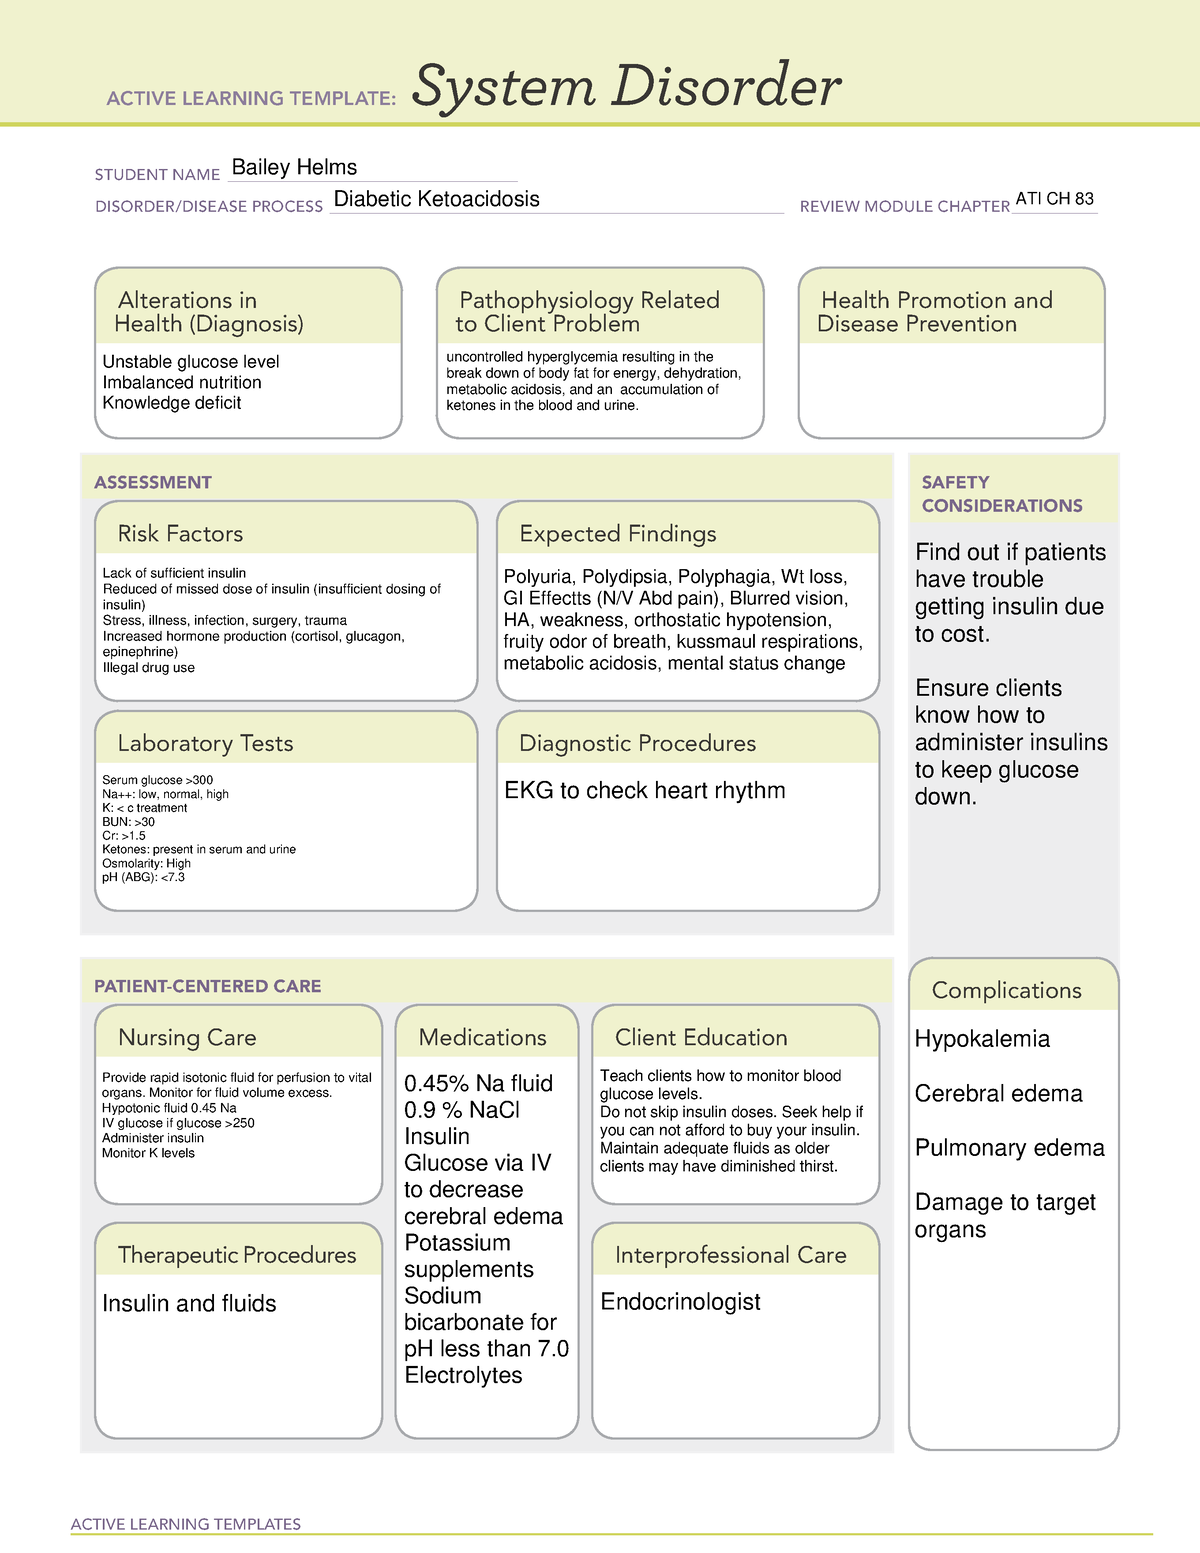 ati-system-disorder-dka-active-learning-templates-system-disorder